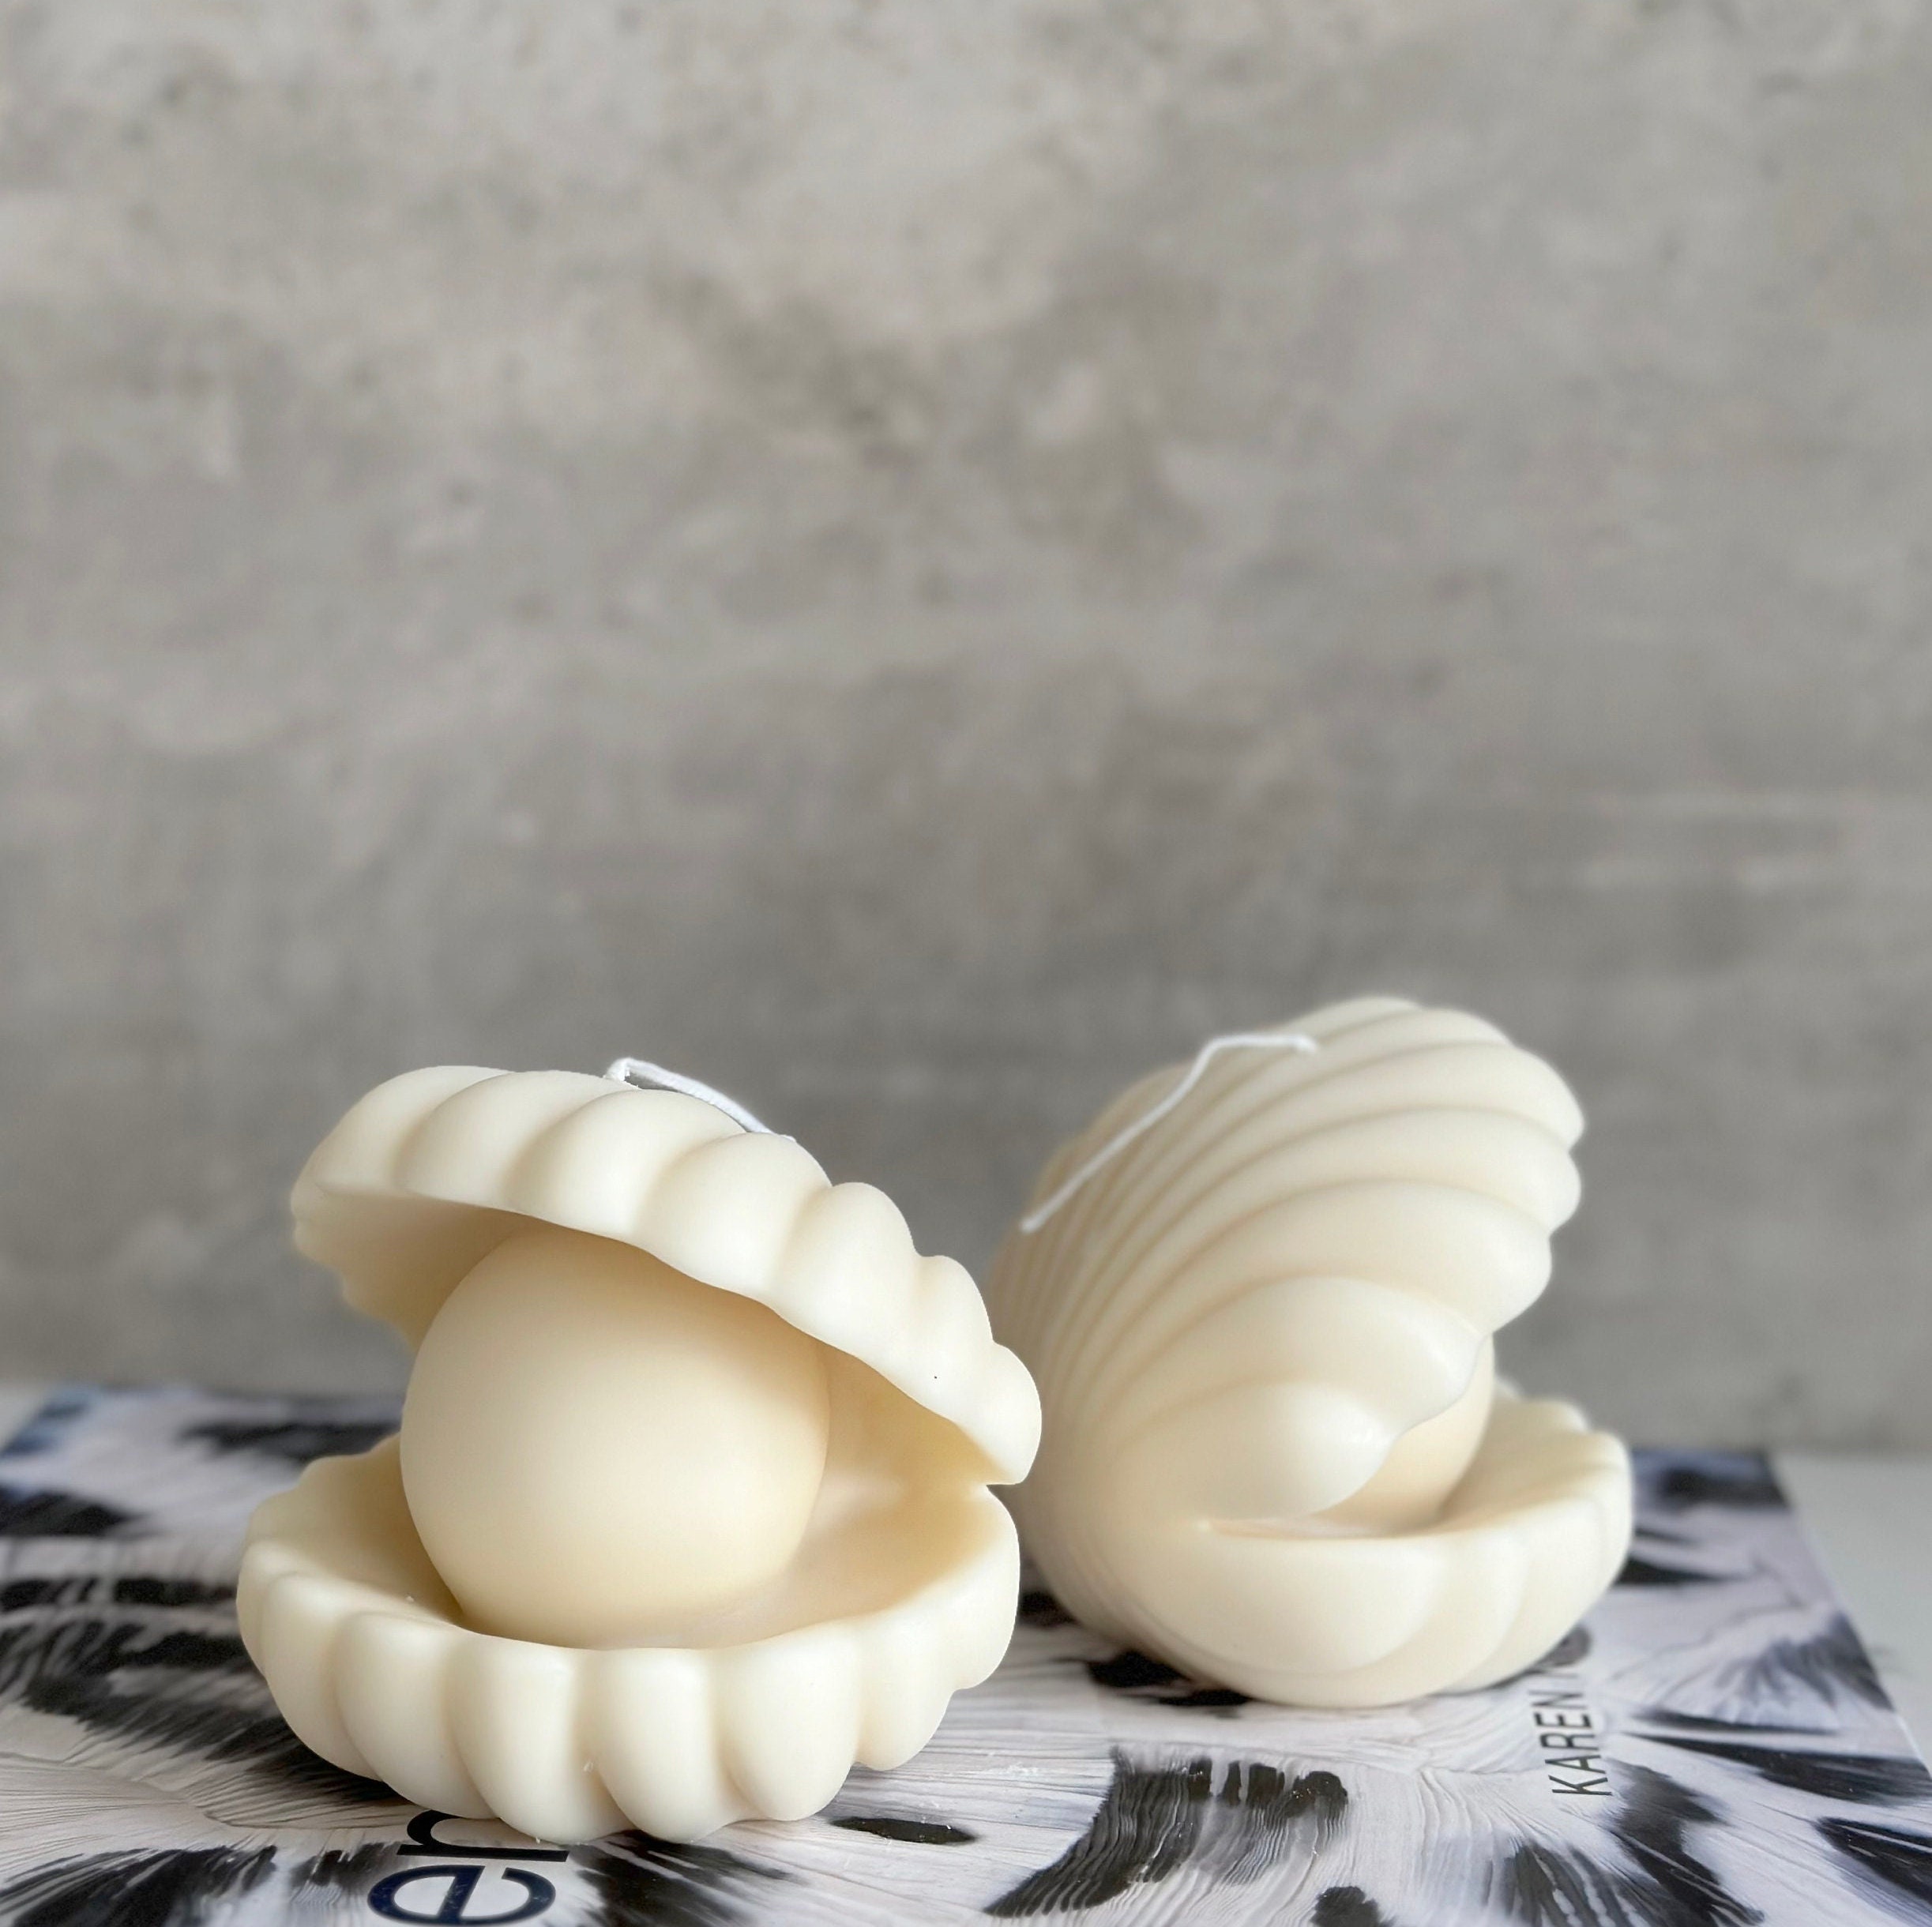 Melt Moulds-clam shells - Heirloom Body Care